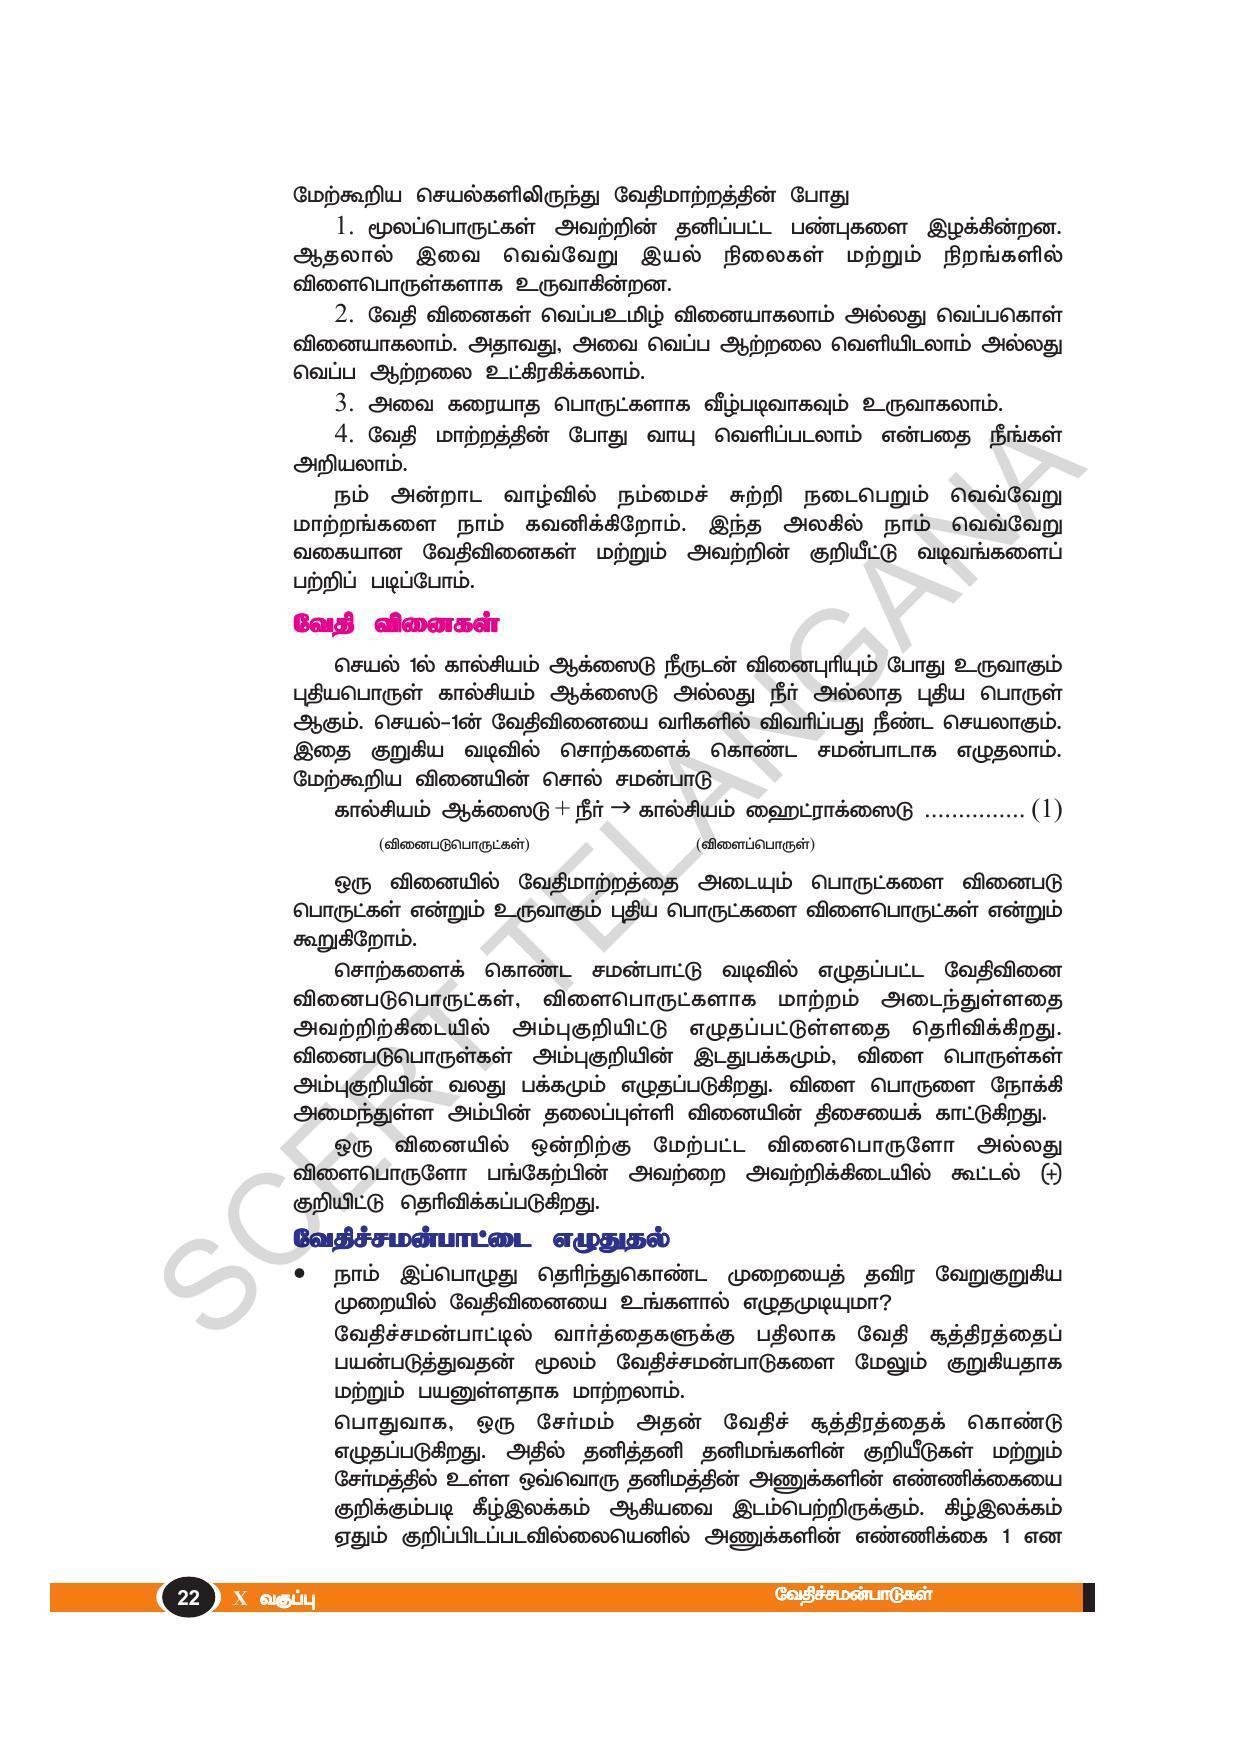 TS SCERT Class 10 Physical Science(Tamil Medium) Text Book - Page 34